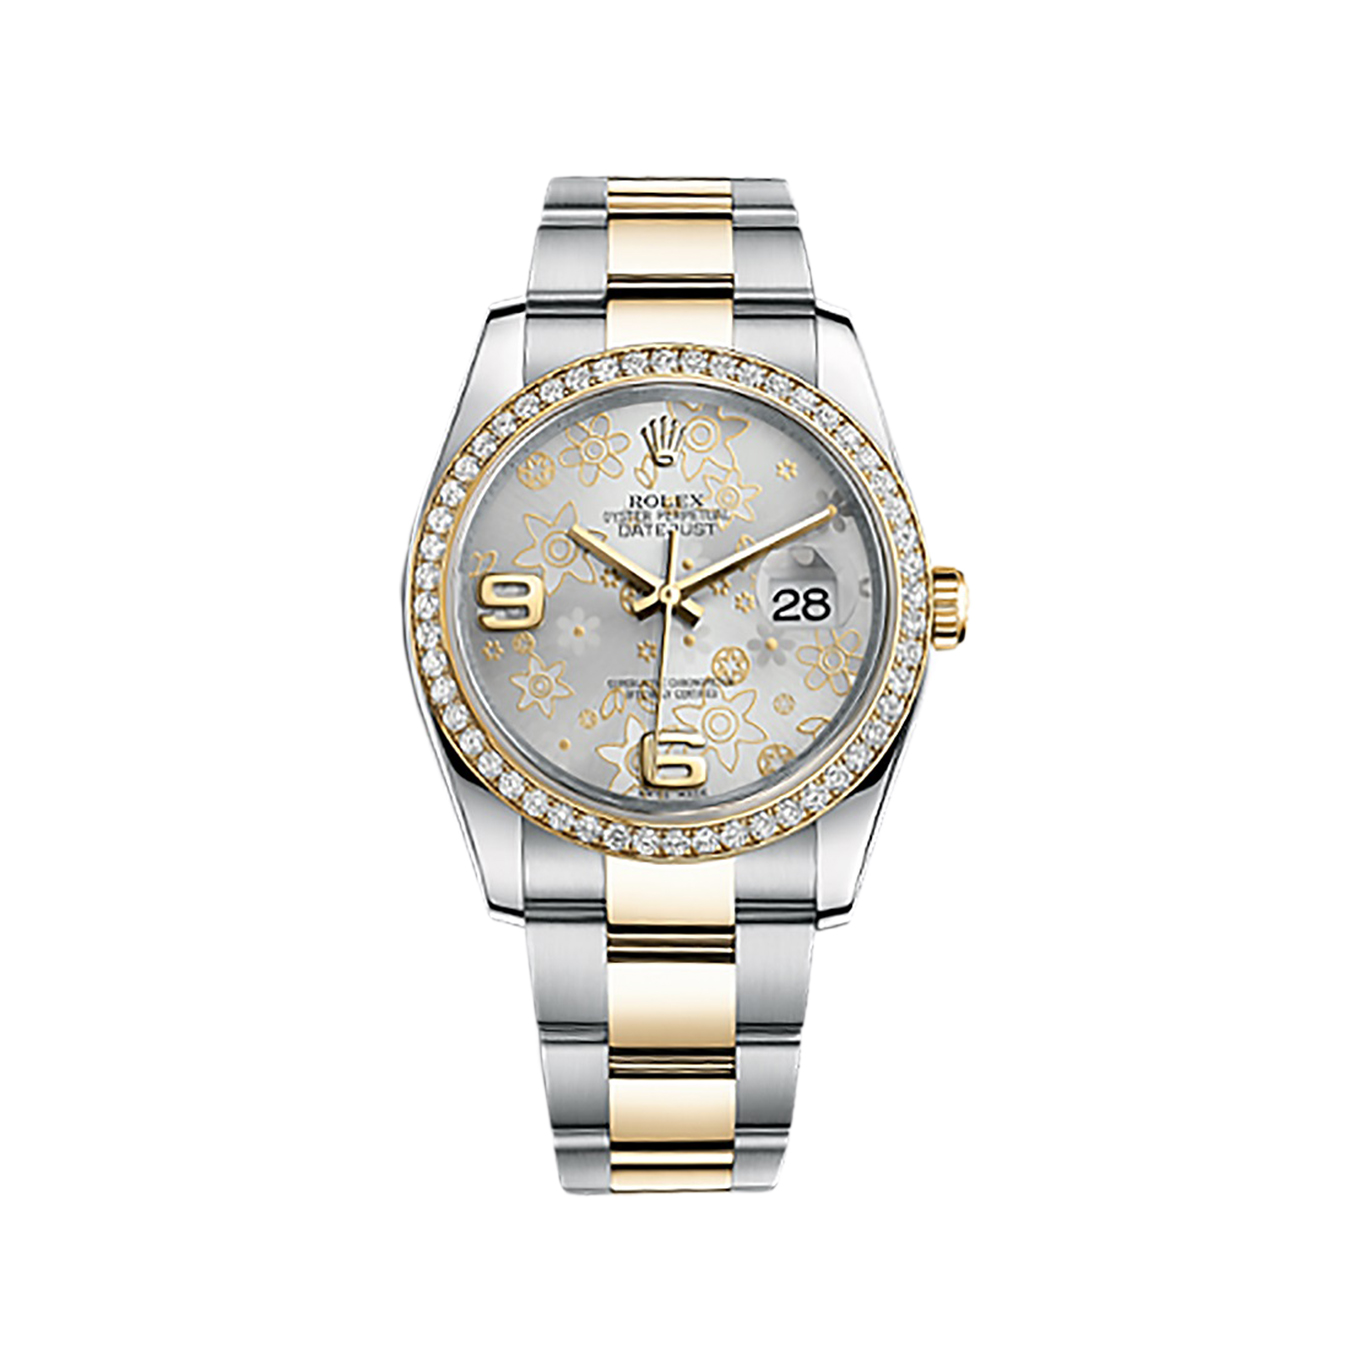 Datejust 36 116243 Gold & Stainless Steel Watch (Silver Floral Motif) - Click Image to Close